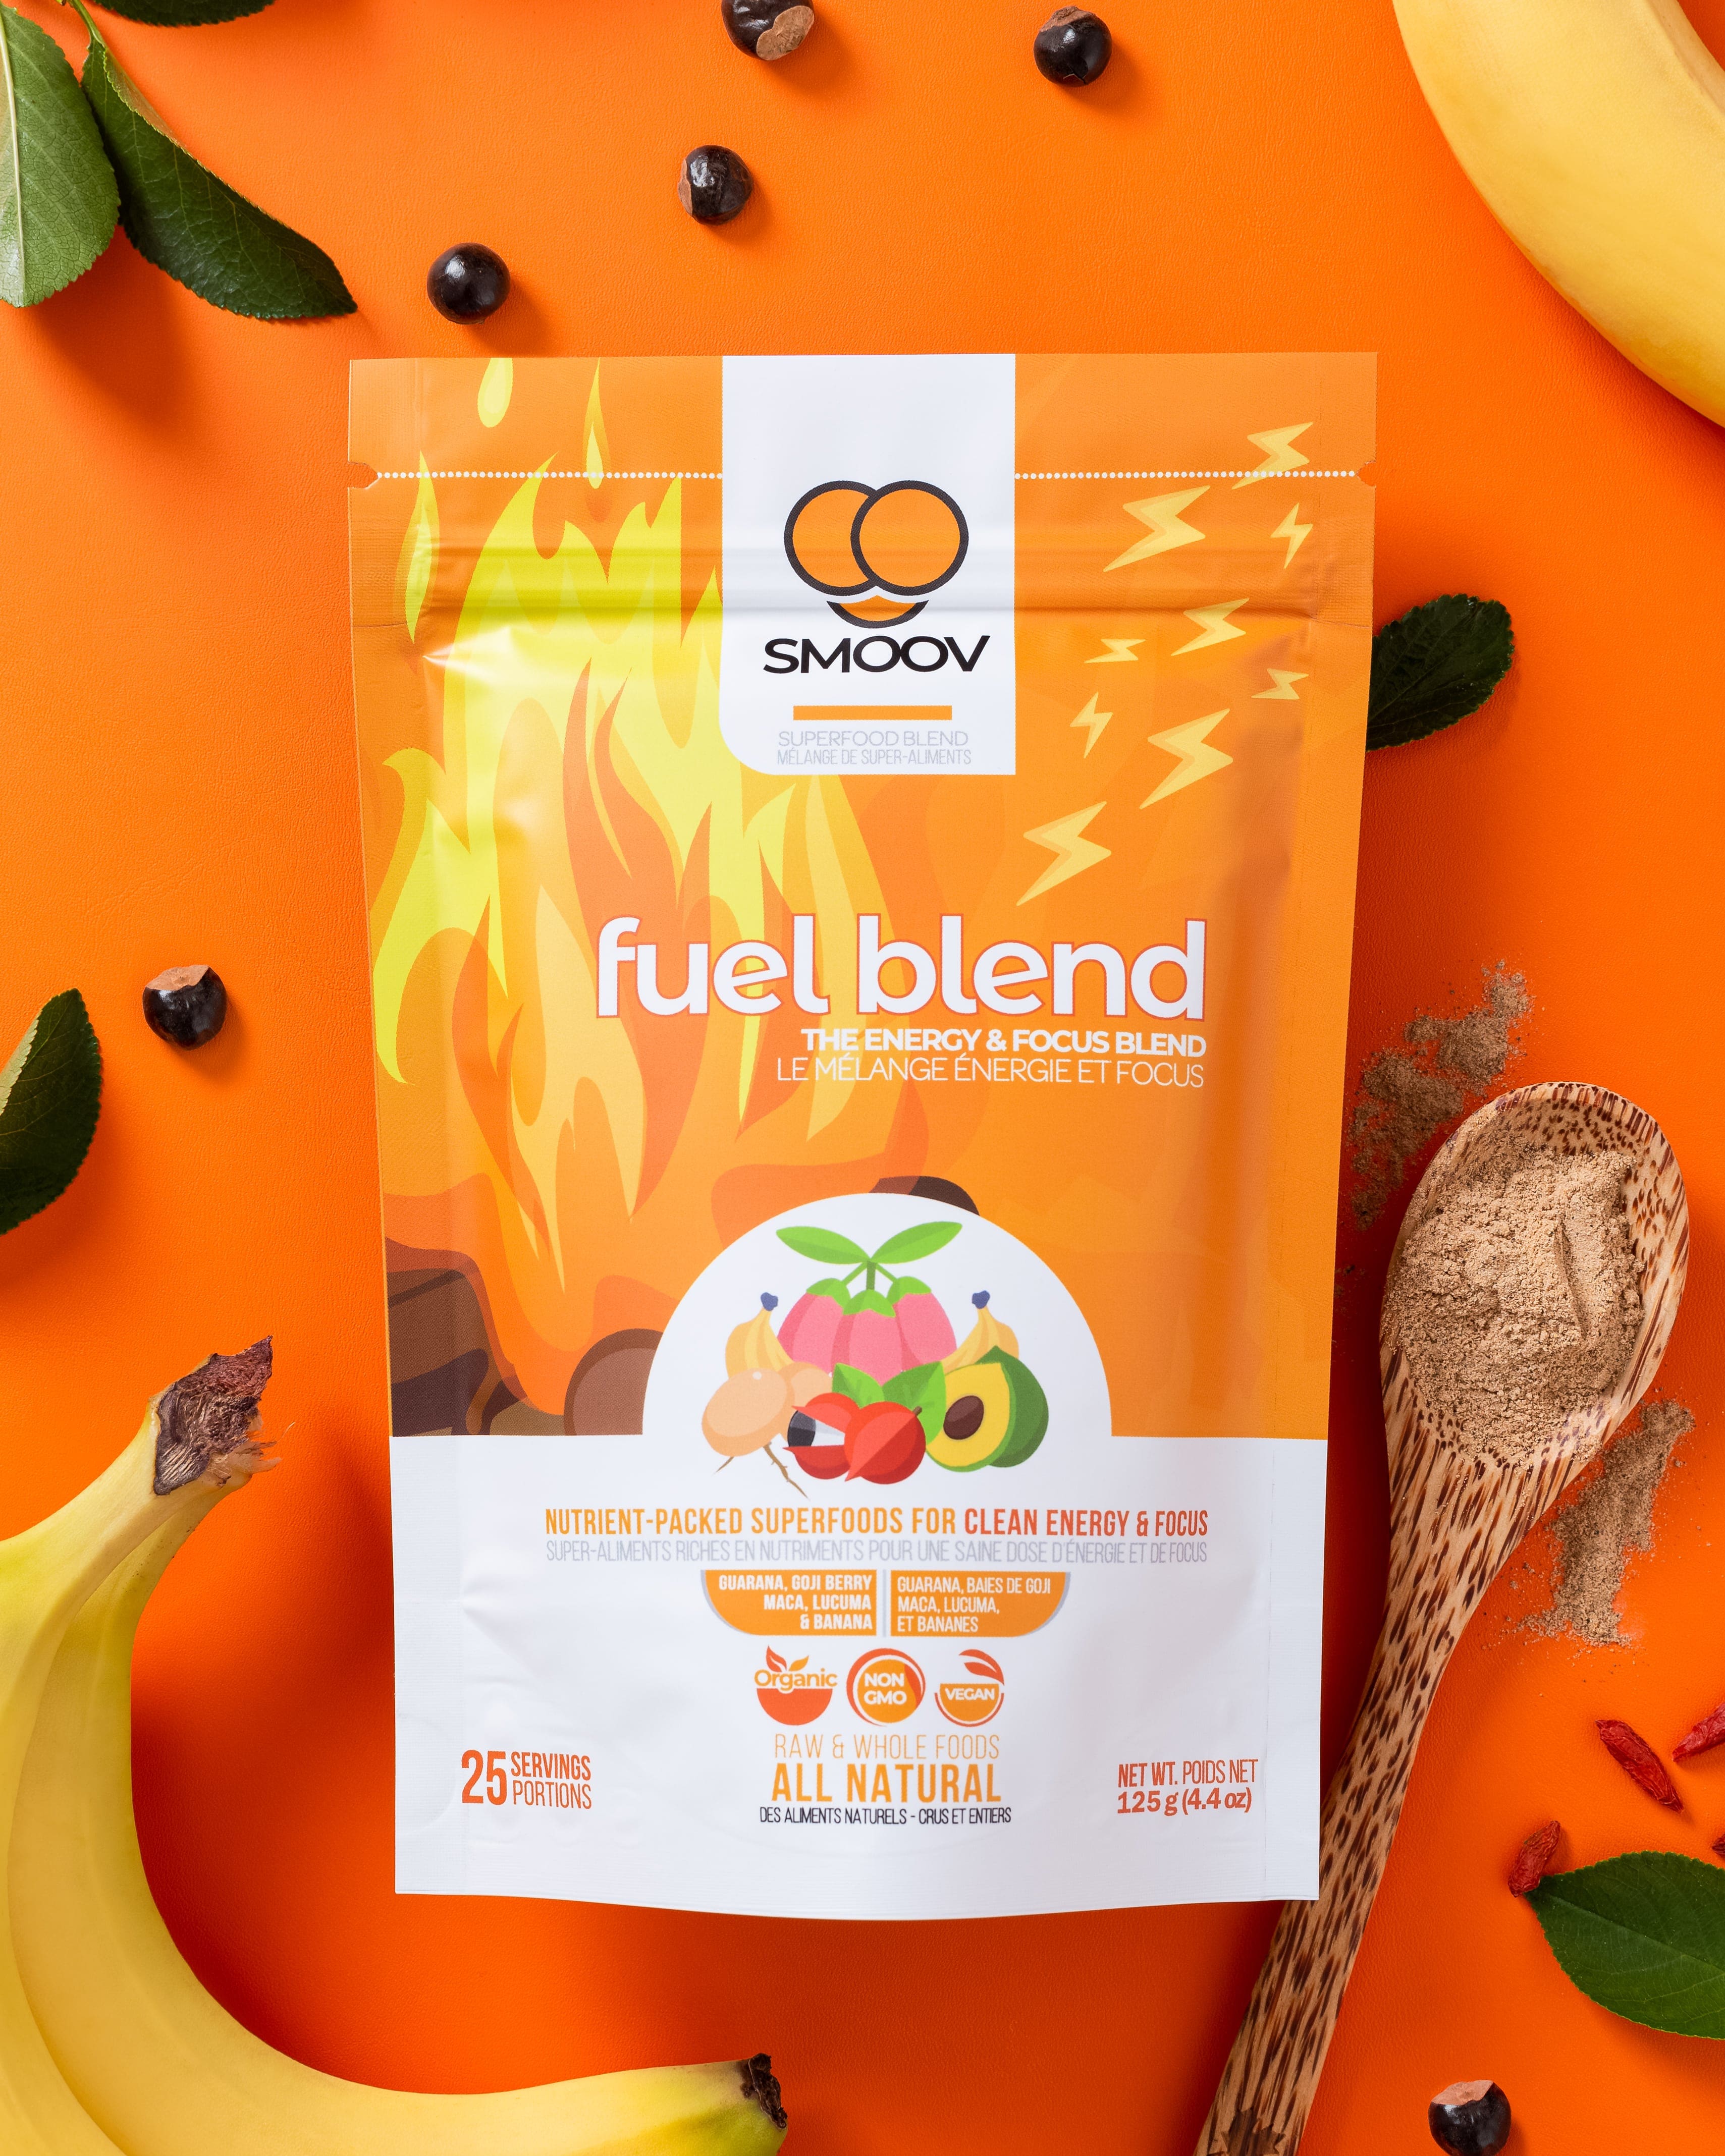 Great source of clean, steady natural plant-based energy; 5 energizing superfoods packed with nutrients for upto 8 hours of energy and focus without jitters or crashes.